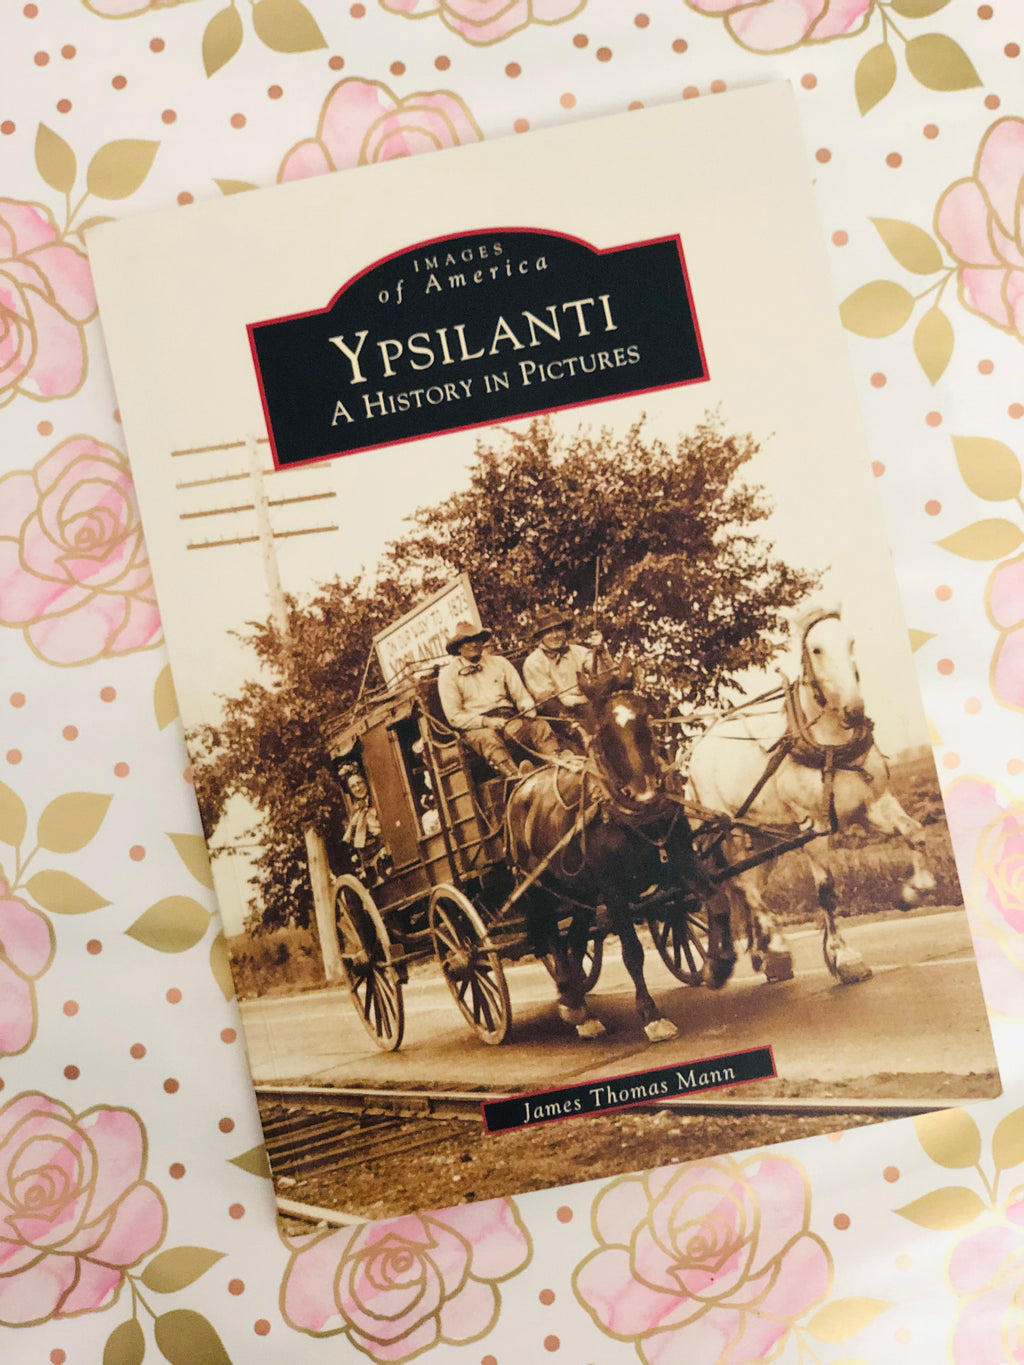 Images of America Ypsilanti: A History in Pictures